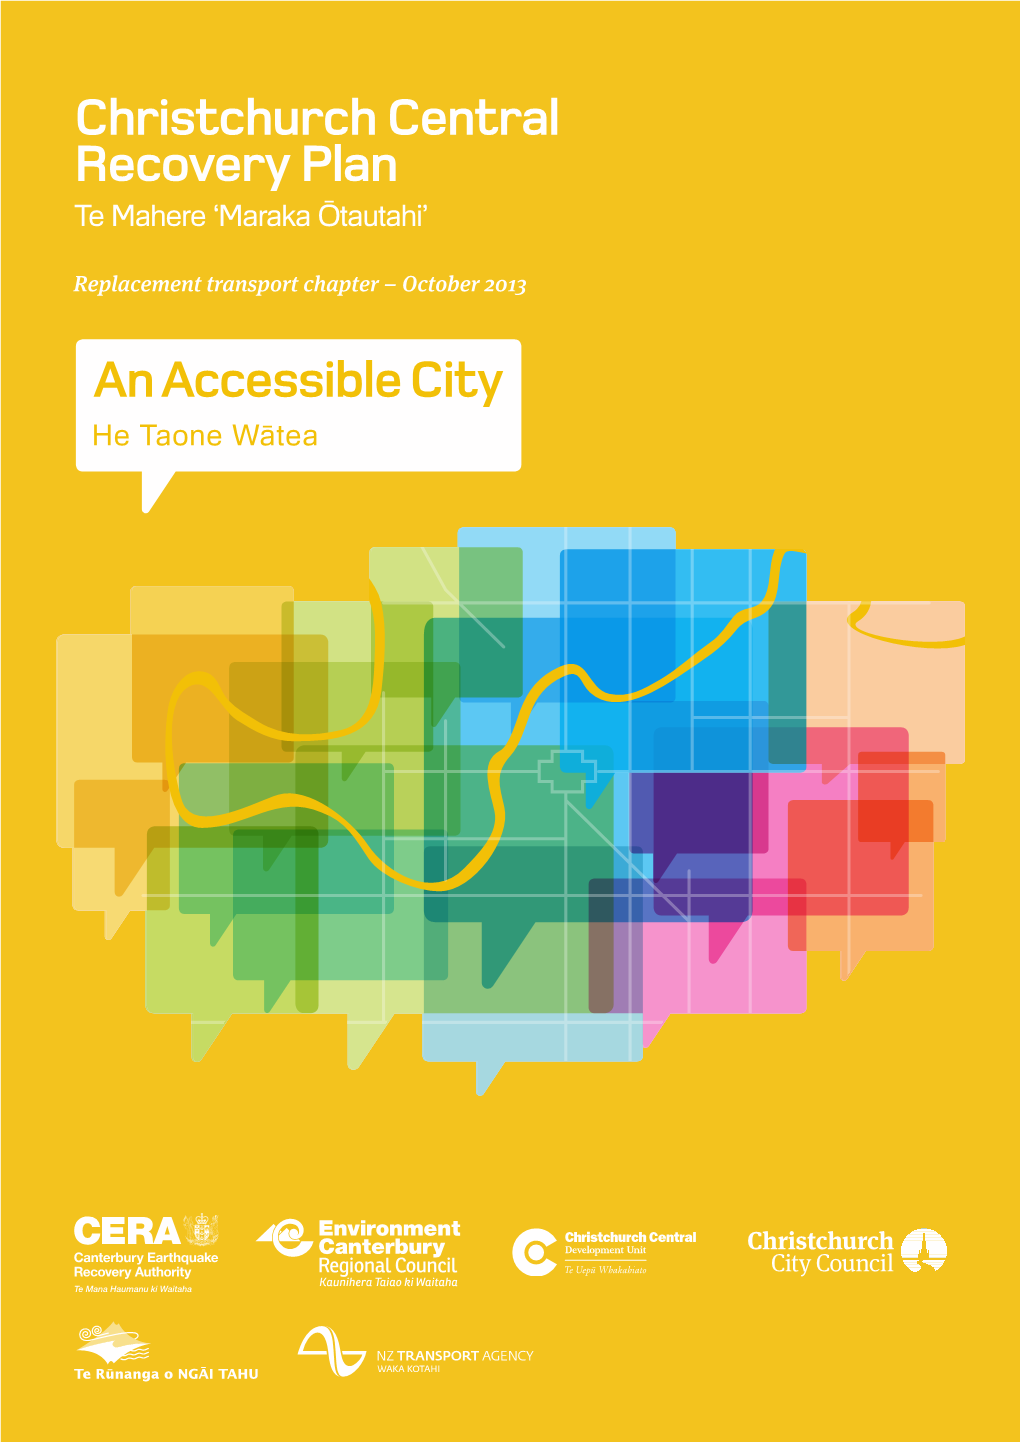 An Accessible City